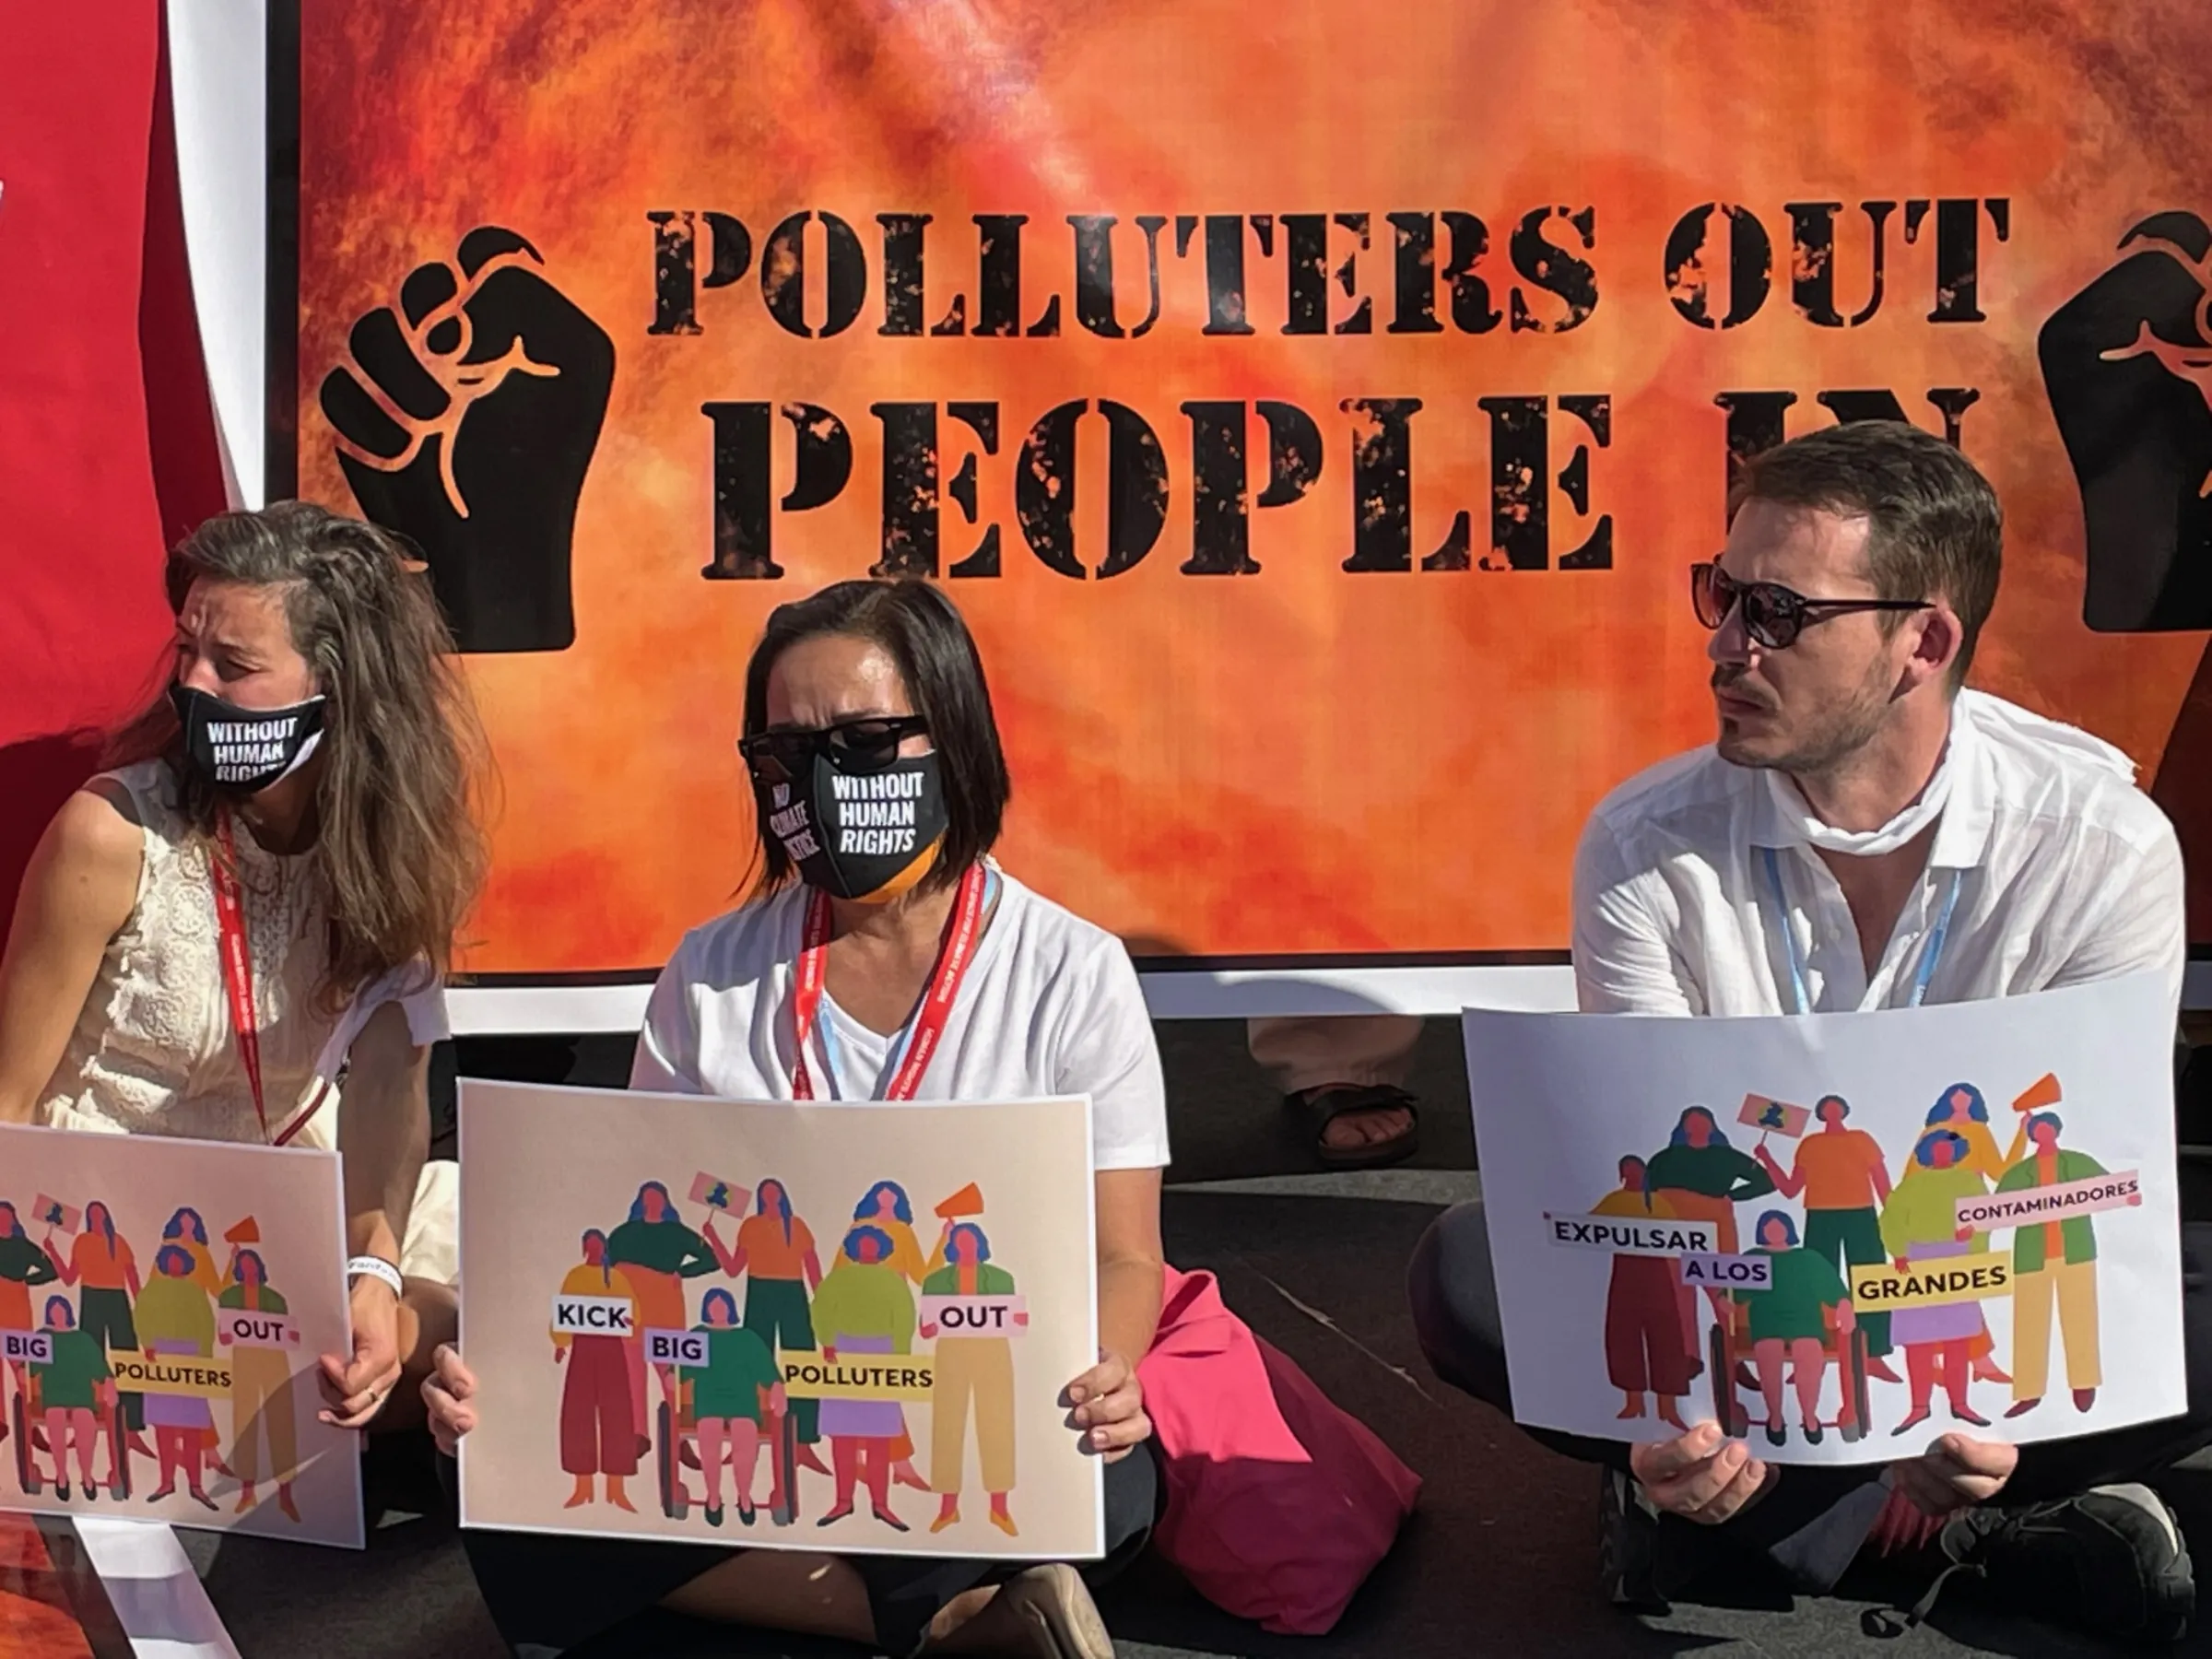 Climate activists demonstrate at the COP27 climate summit in Egypt against the presence of fossil-fuel industry representatives at the talks, Sharm El-Sheikh, Egypt, November 10, 2022. Thomson Reuters Foundation/Megan Rowling